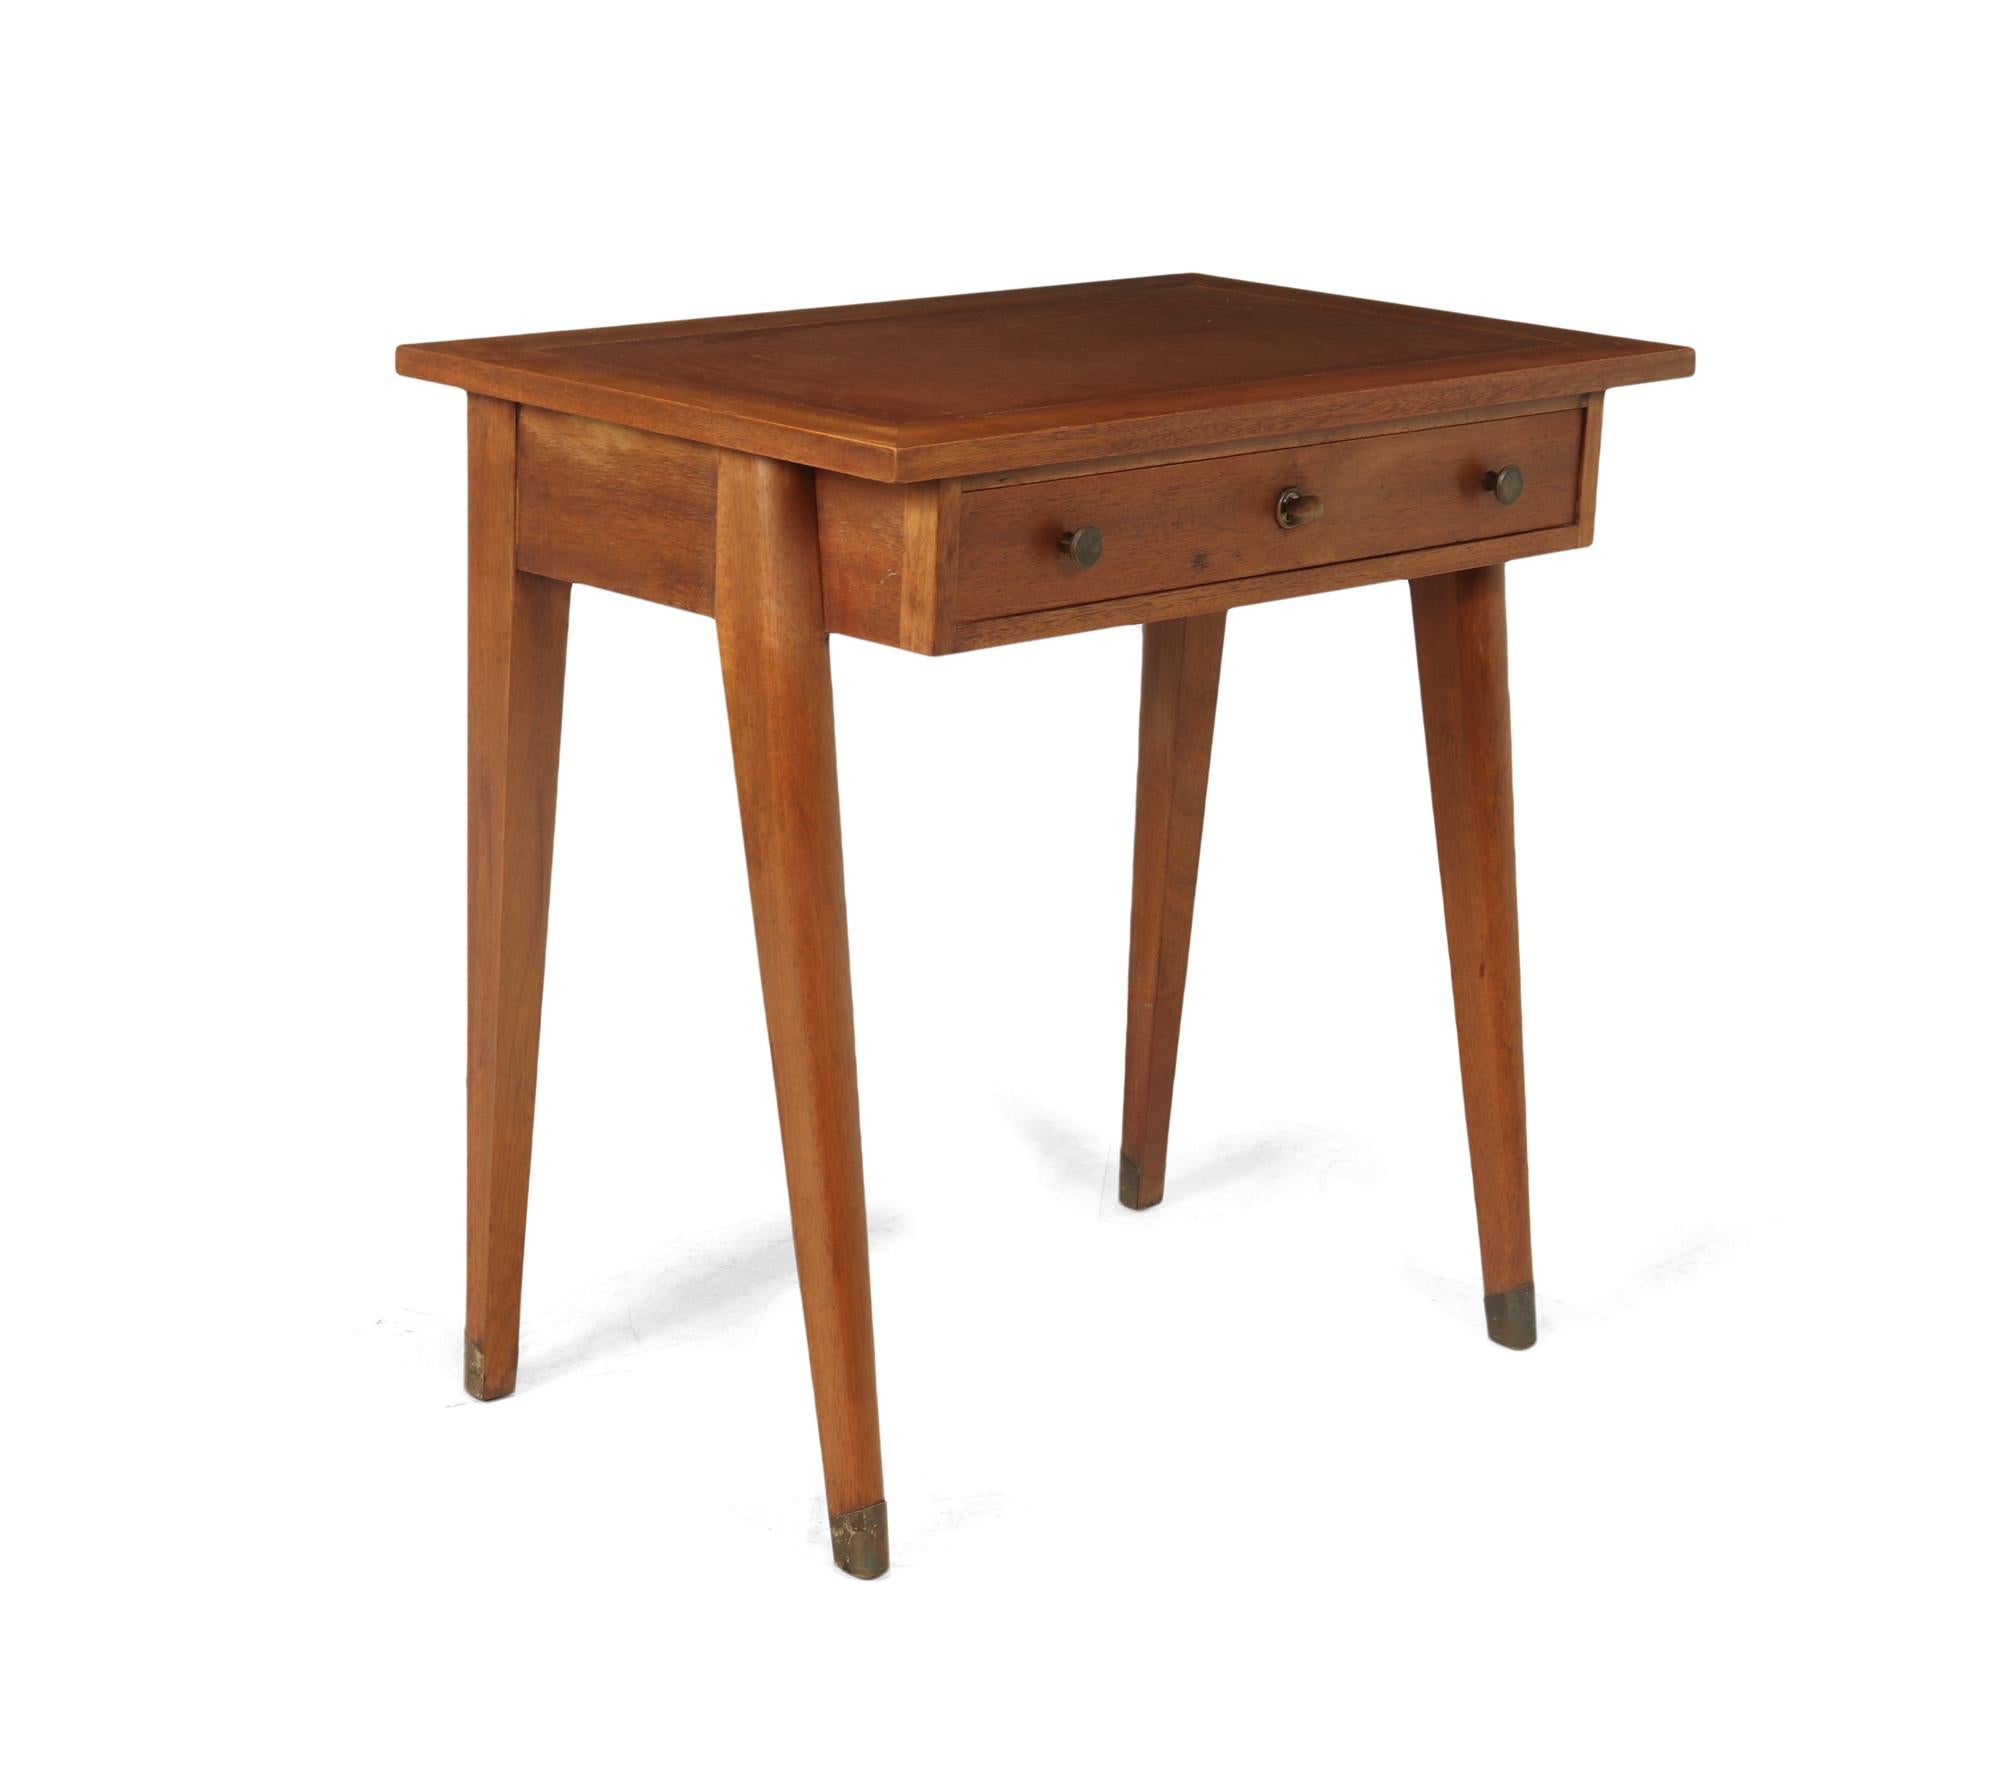 French Modernist Desk by Jacques Adnet, c1940